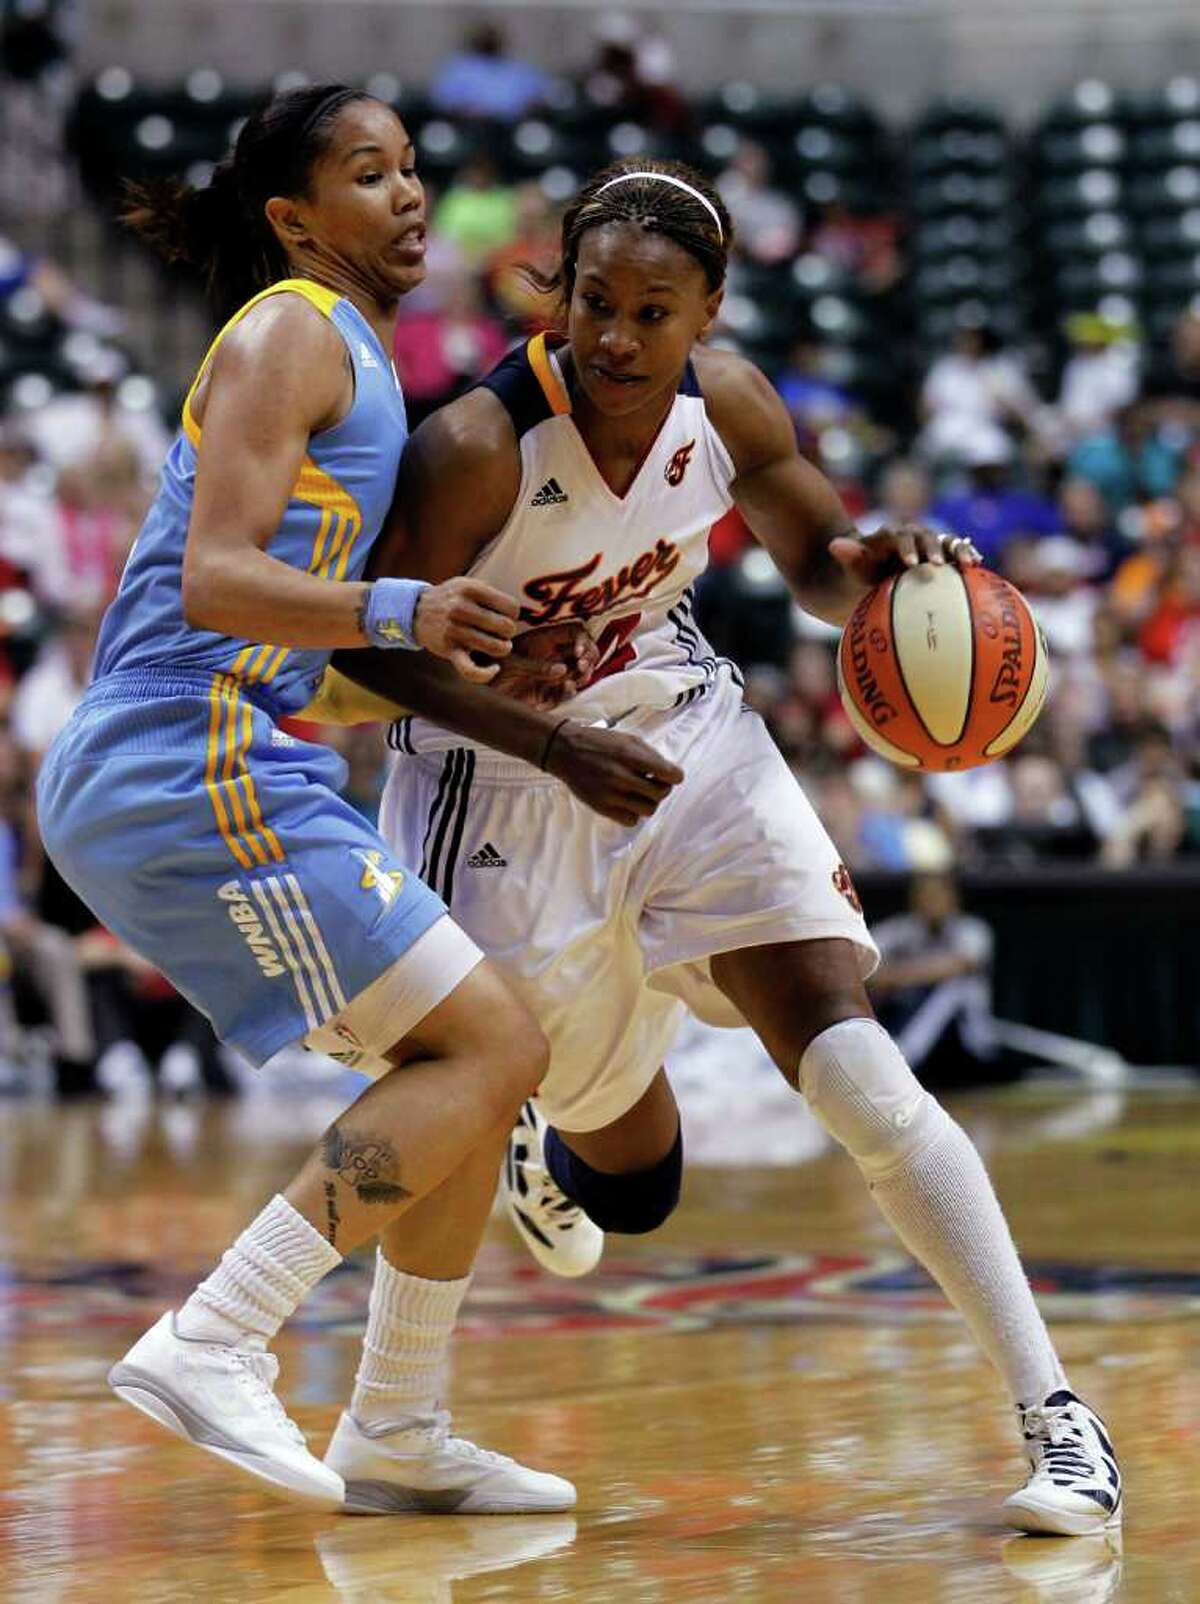 Indiana Fever forward Tamika Catchings, right, works the ball as Chicago Sky's Tamera Young defends during the second half of a WNBA basketball game in Indianapolis, Thursday, July 21, 2011. The Fever defeated the Sky 77-63. (AP Photo/Michael Conroy)